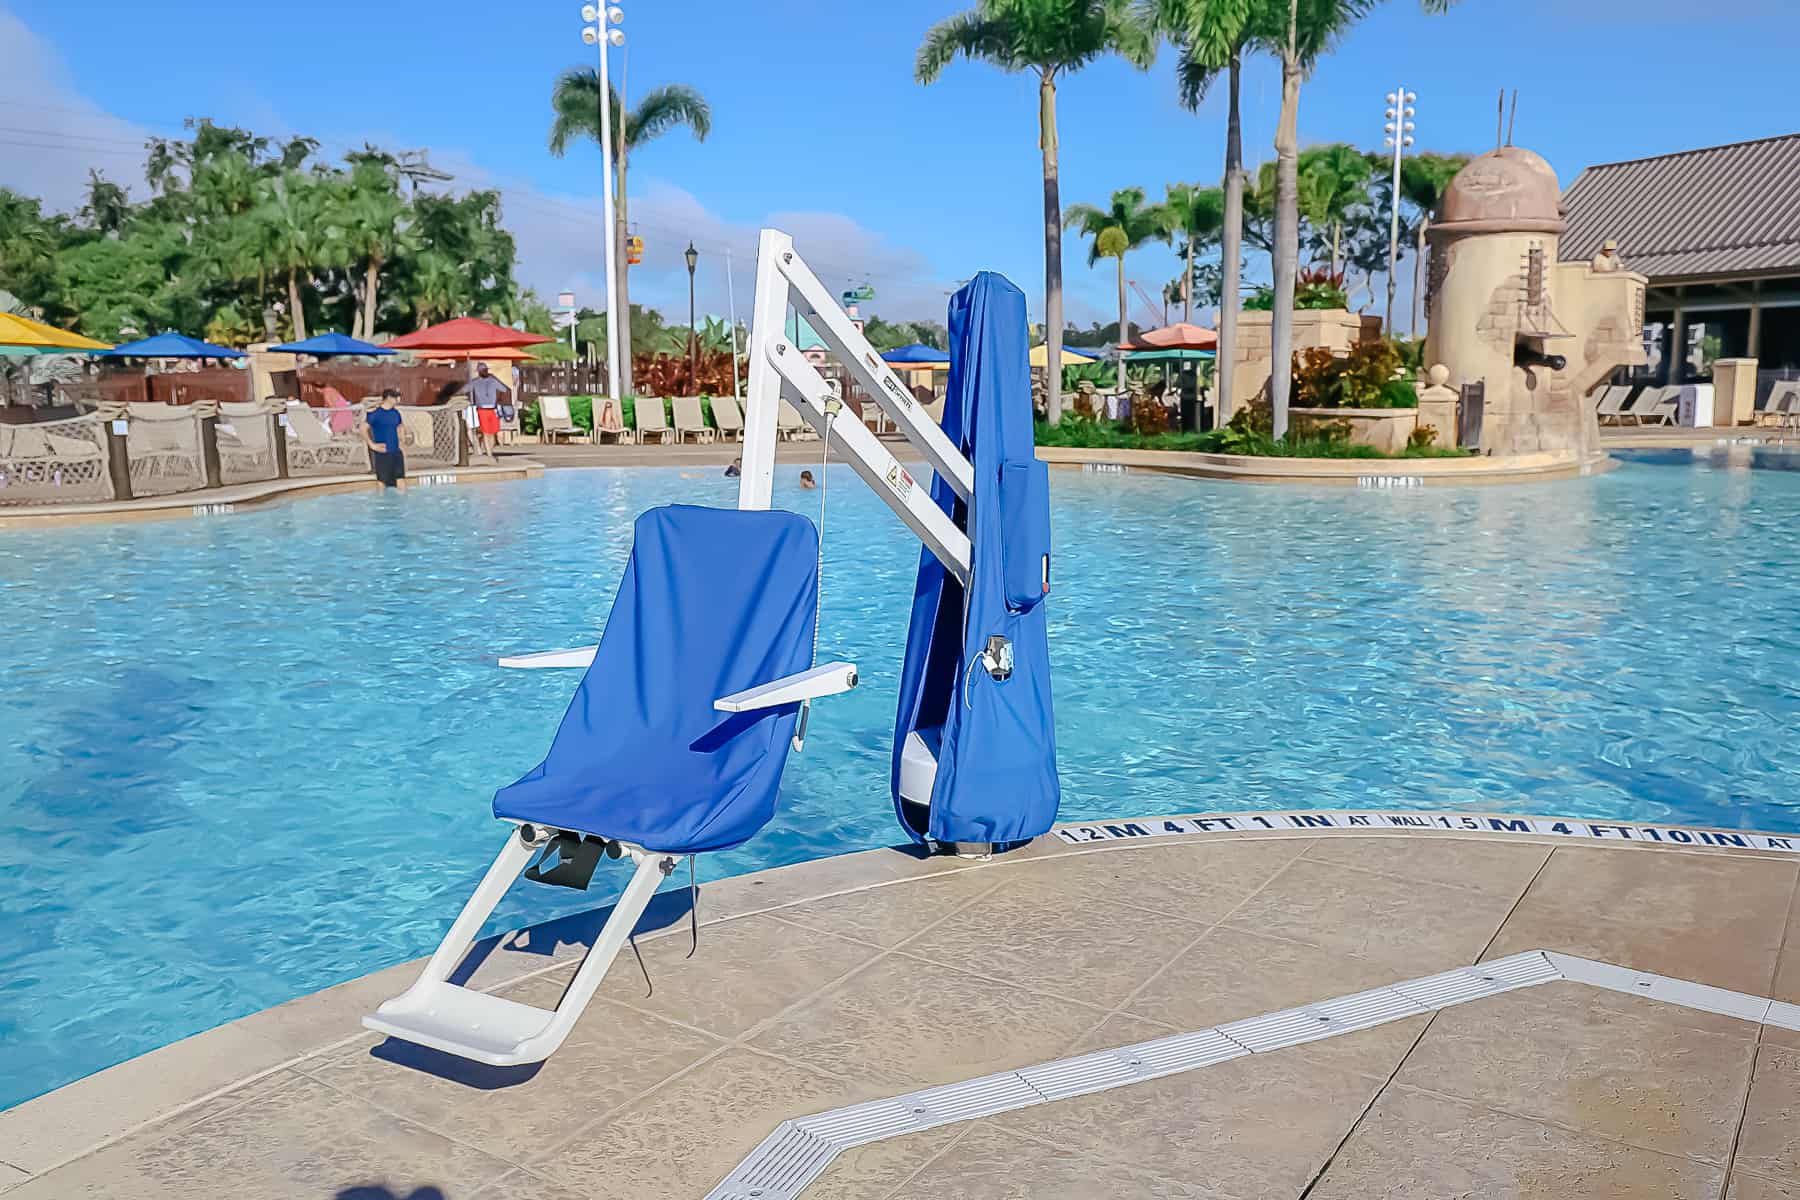 mobility life to help guests with accessibility issues get in the pool